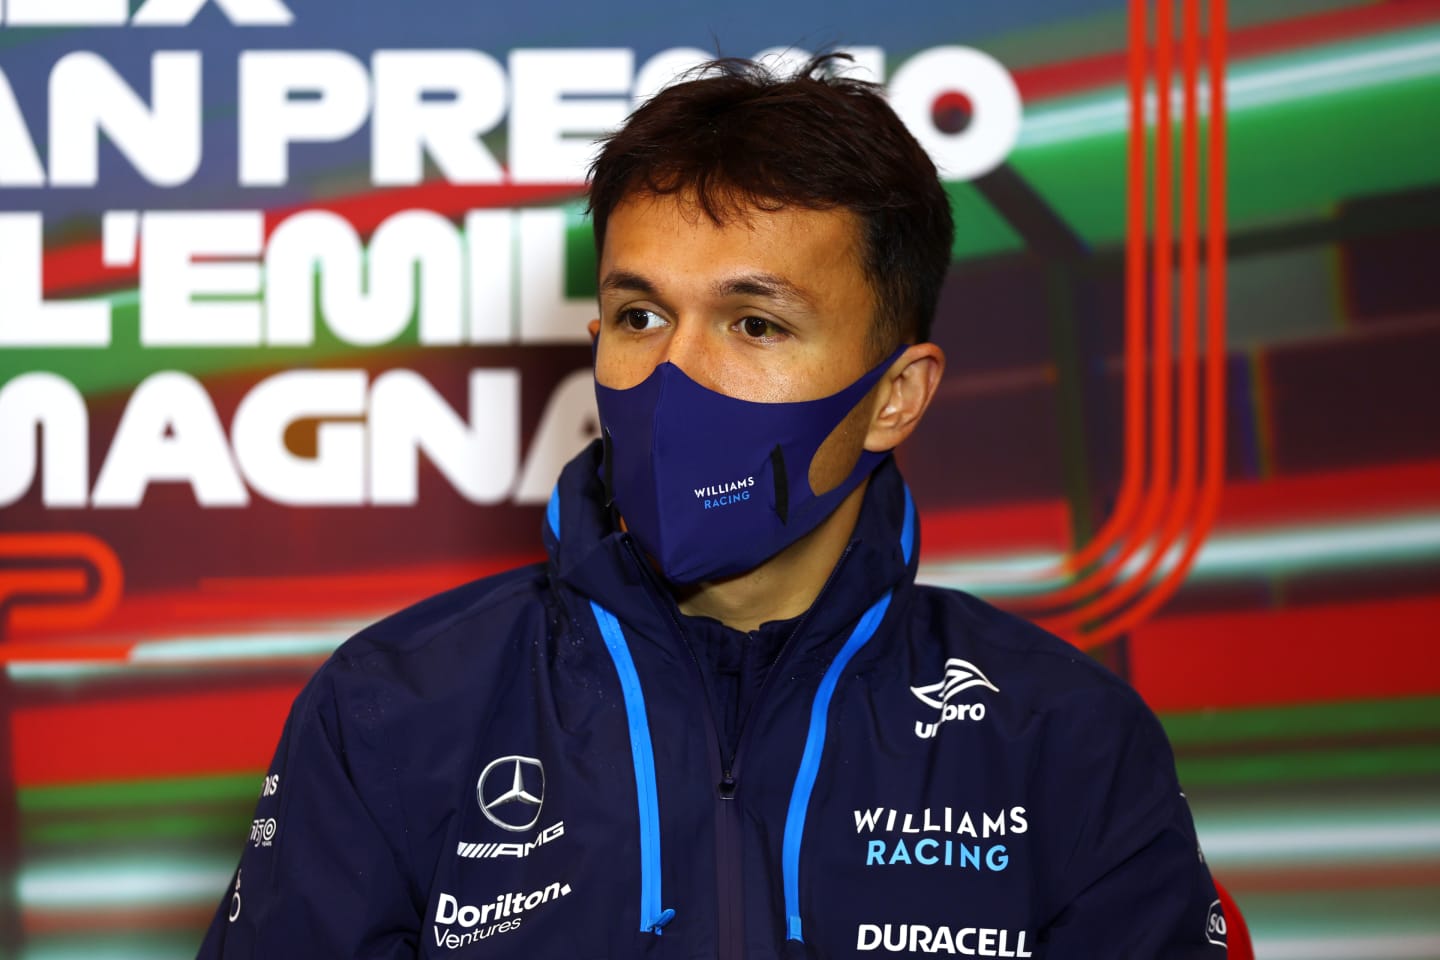 IMOLA, ITALY - APRIL 22: Alexander Albon of Thailand and Williams talks in the Drivers Press Conference prior to practice ahead of the F1 Grand Prix of Emilia Romagna at Autodromo Enzo e Dino Ferrari on April 22, 2022 in Imola, Italy. (Photo by Lars Baron/Getty Images)